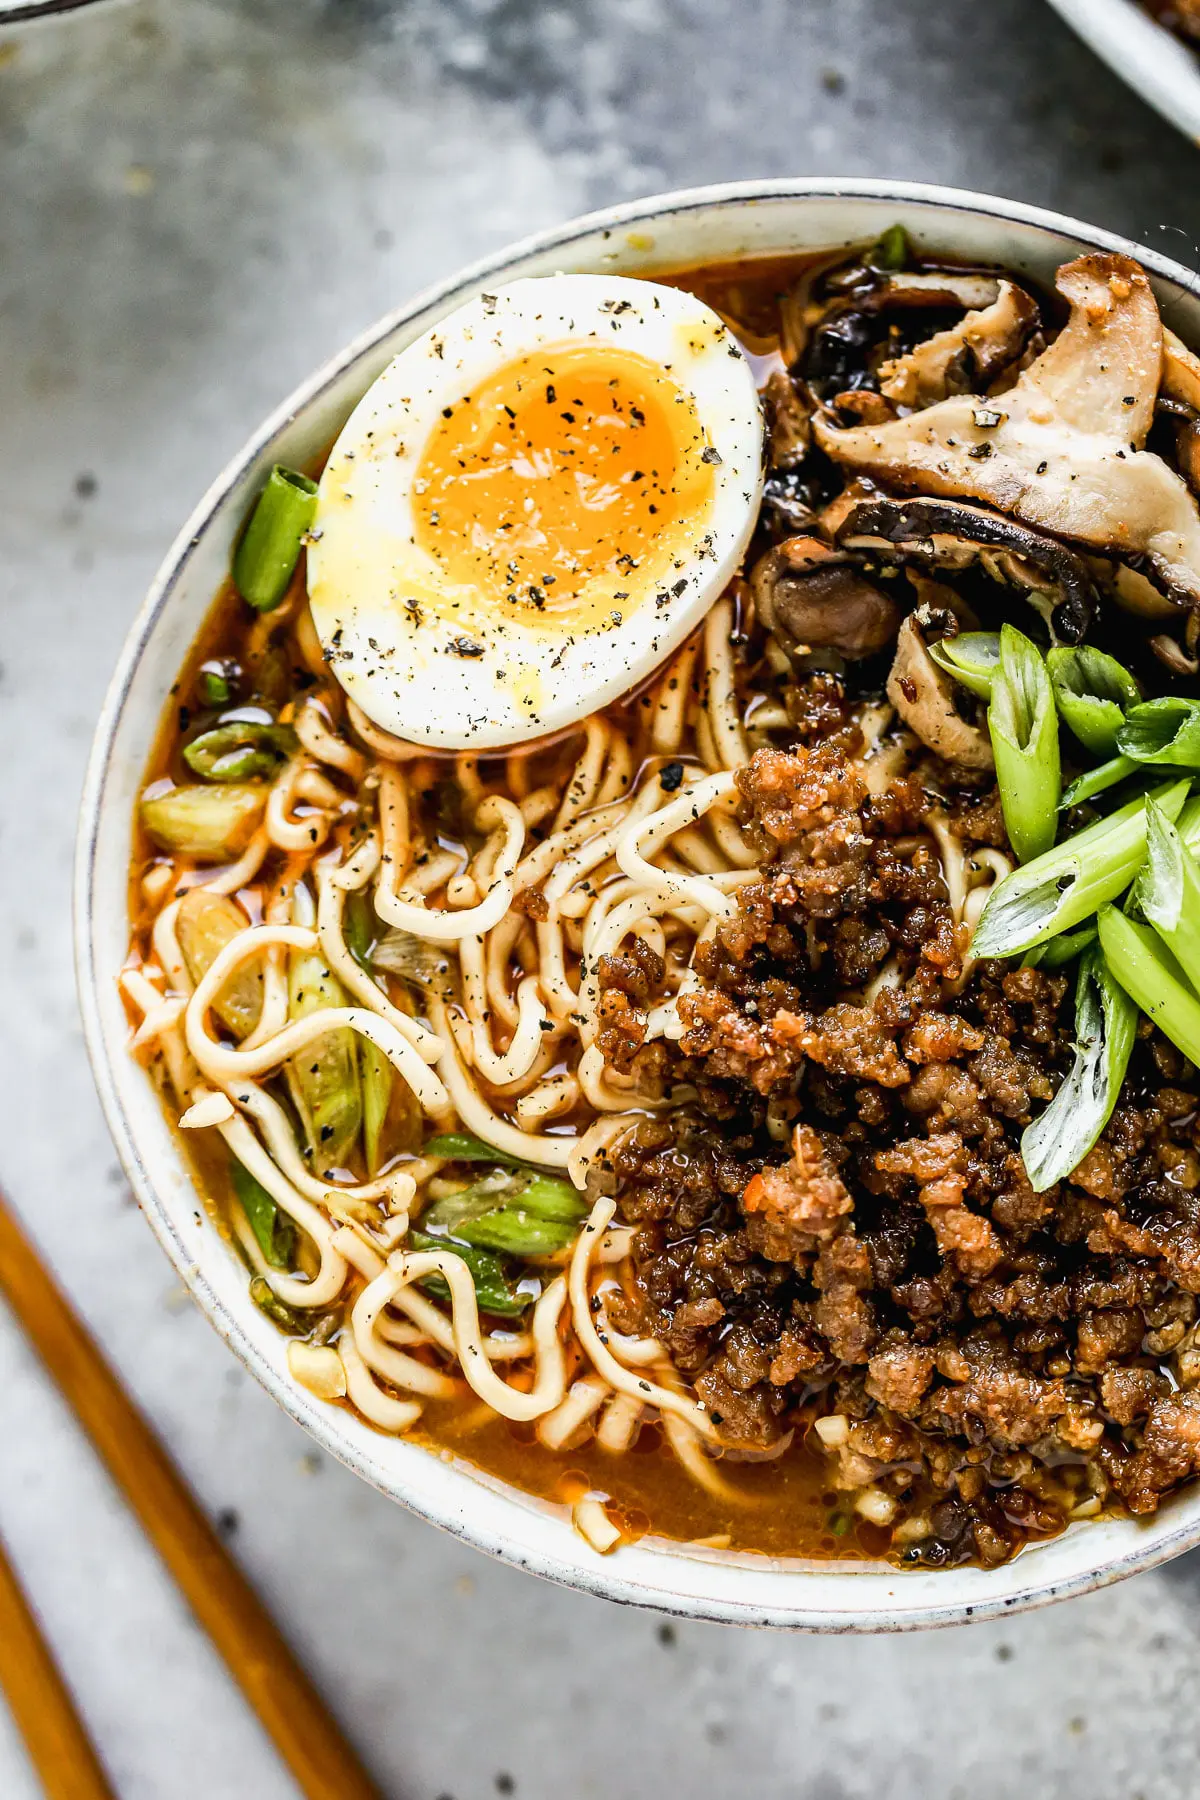 These semi-homemade Pork Miso Ramen Bowls are packed with a spicy miso broth, crispy hoisin pork, quick-pickled mushrooms, a jammy egg (of course), and chewy ramen noodles. They’re highly addictive, perfect for busy days, and the only thing I want to eat from now until spring. Find the full recipe with the direct link in our profile. 